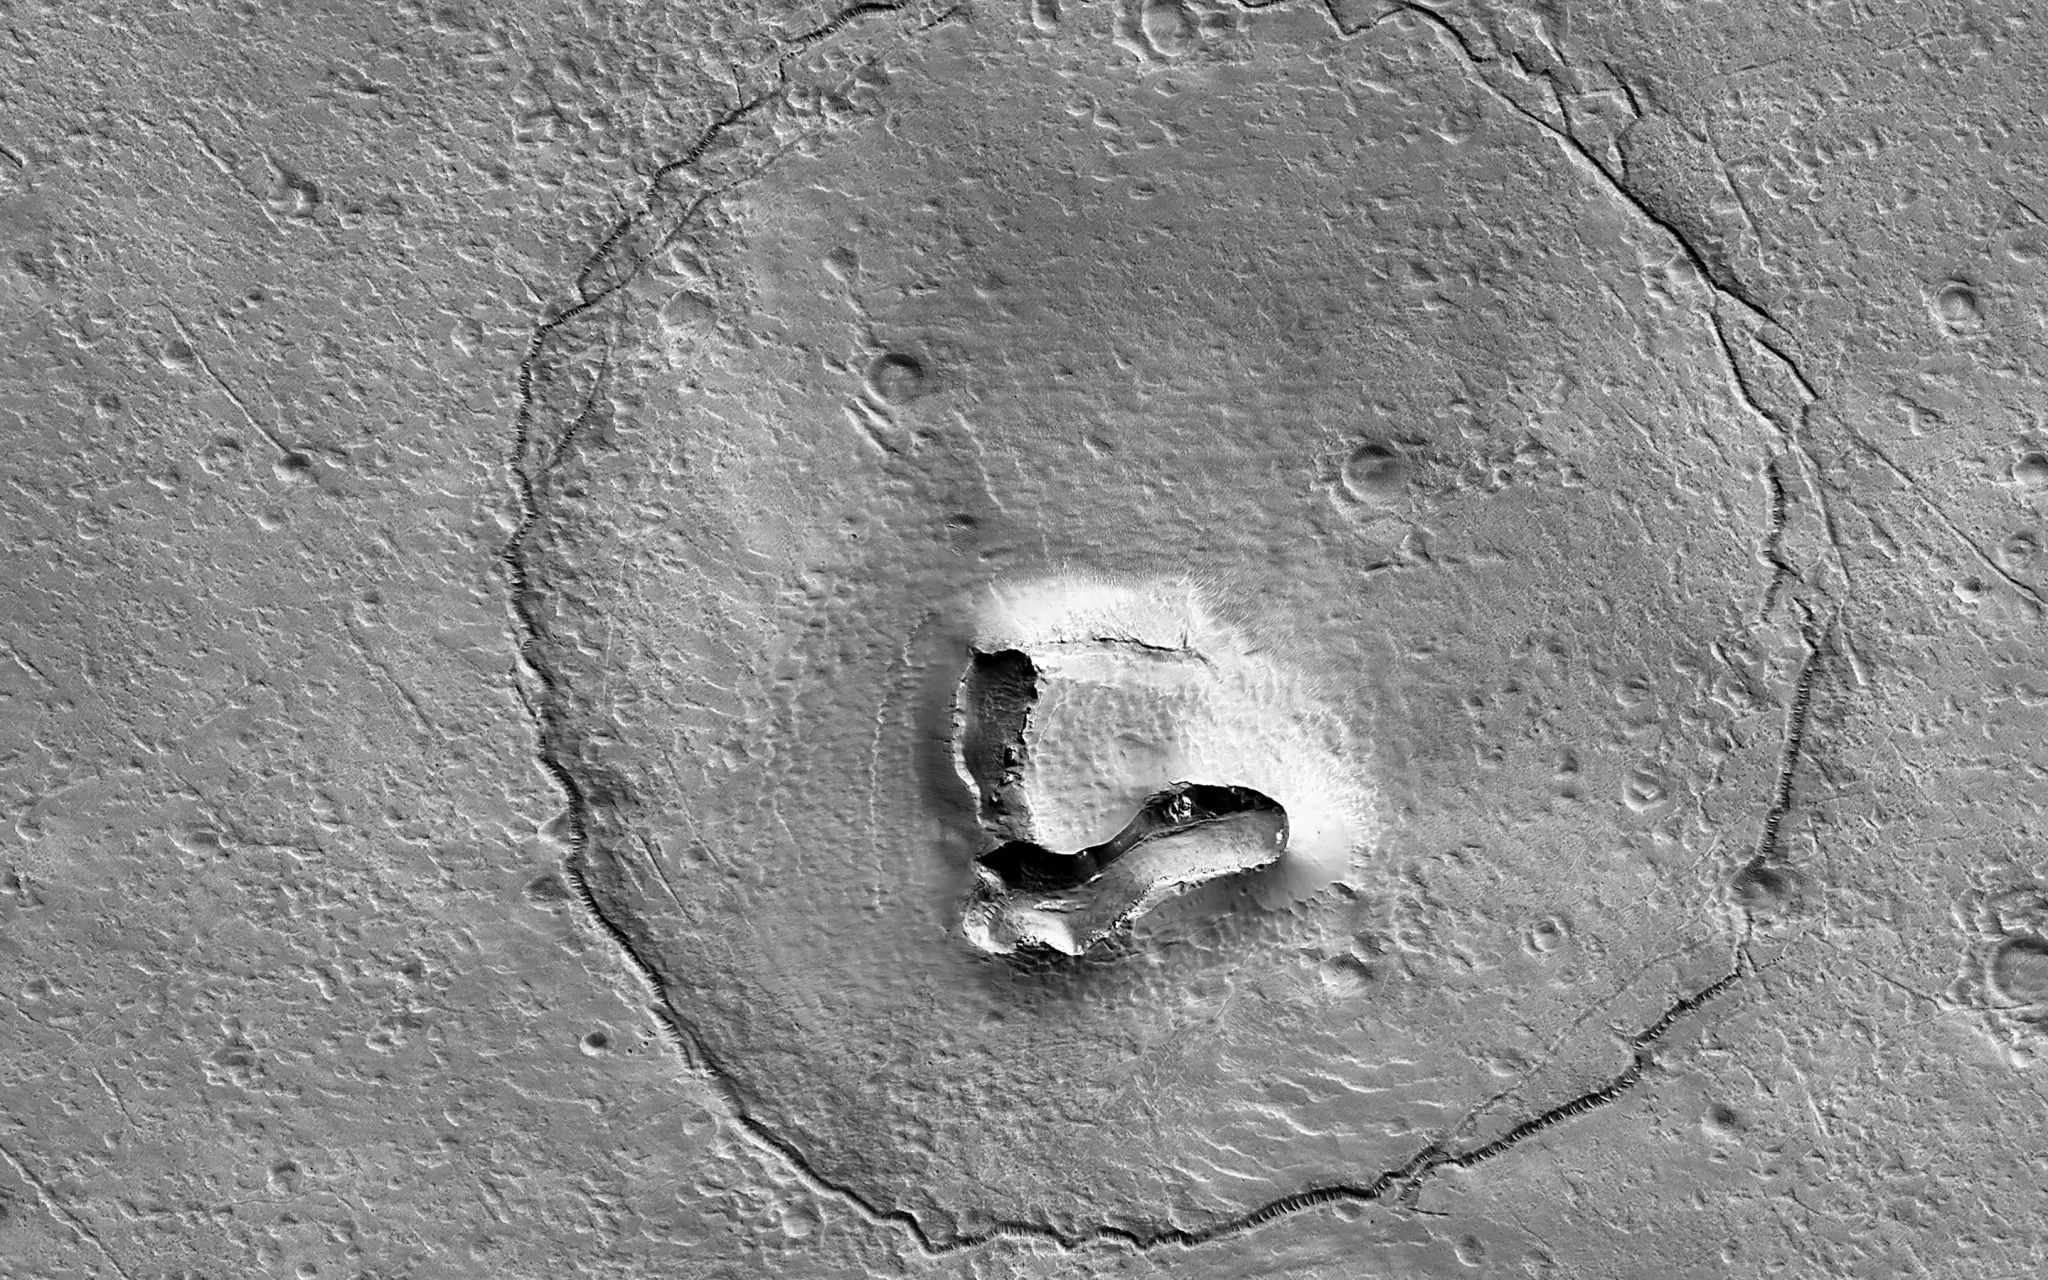 Satellite image of a large circular feature on a gray, rocky surface with a raised, irregularly shaped structure in the center and several small craters scattered around.